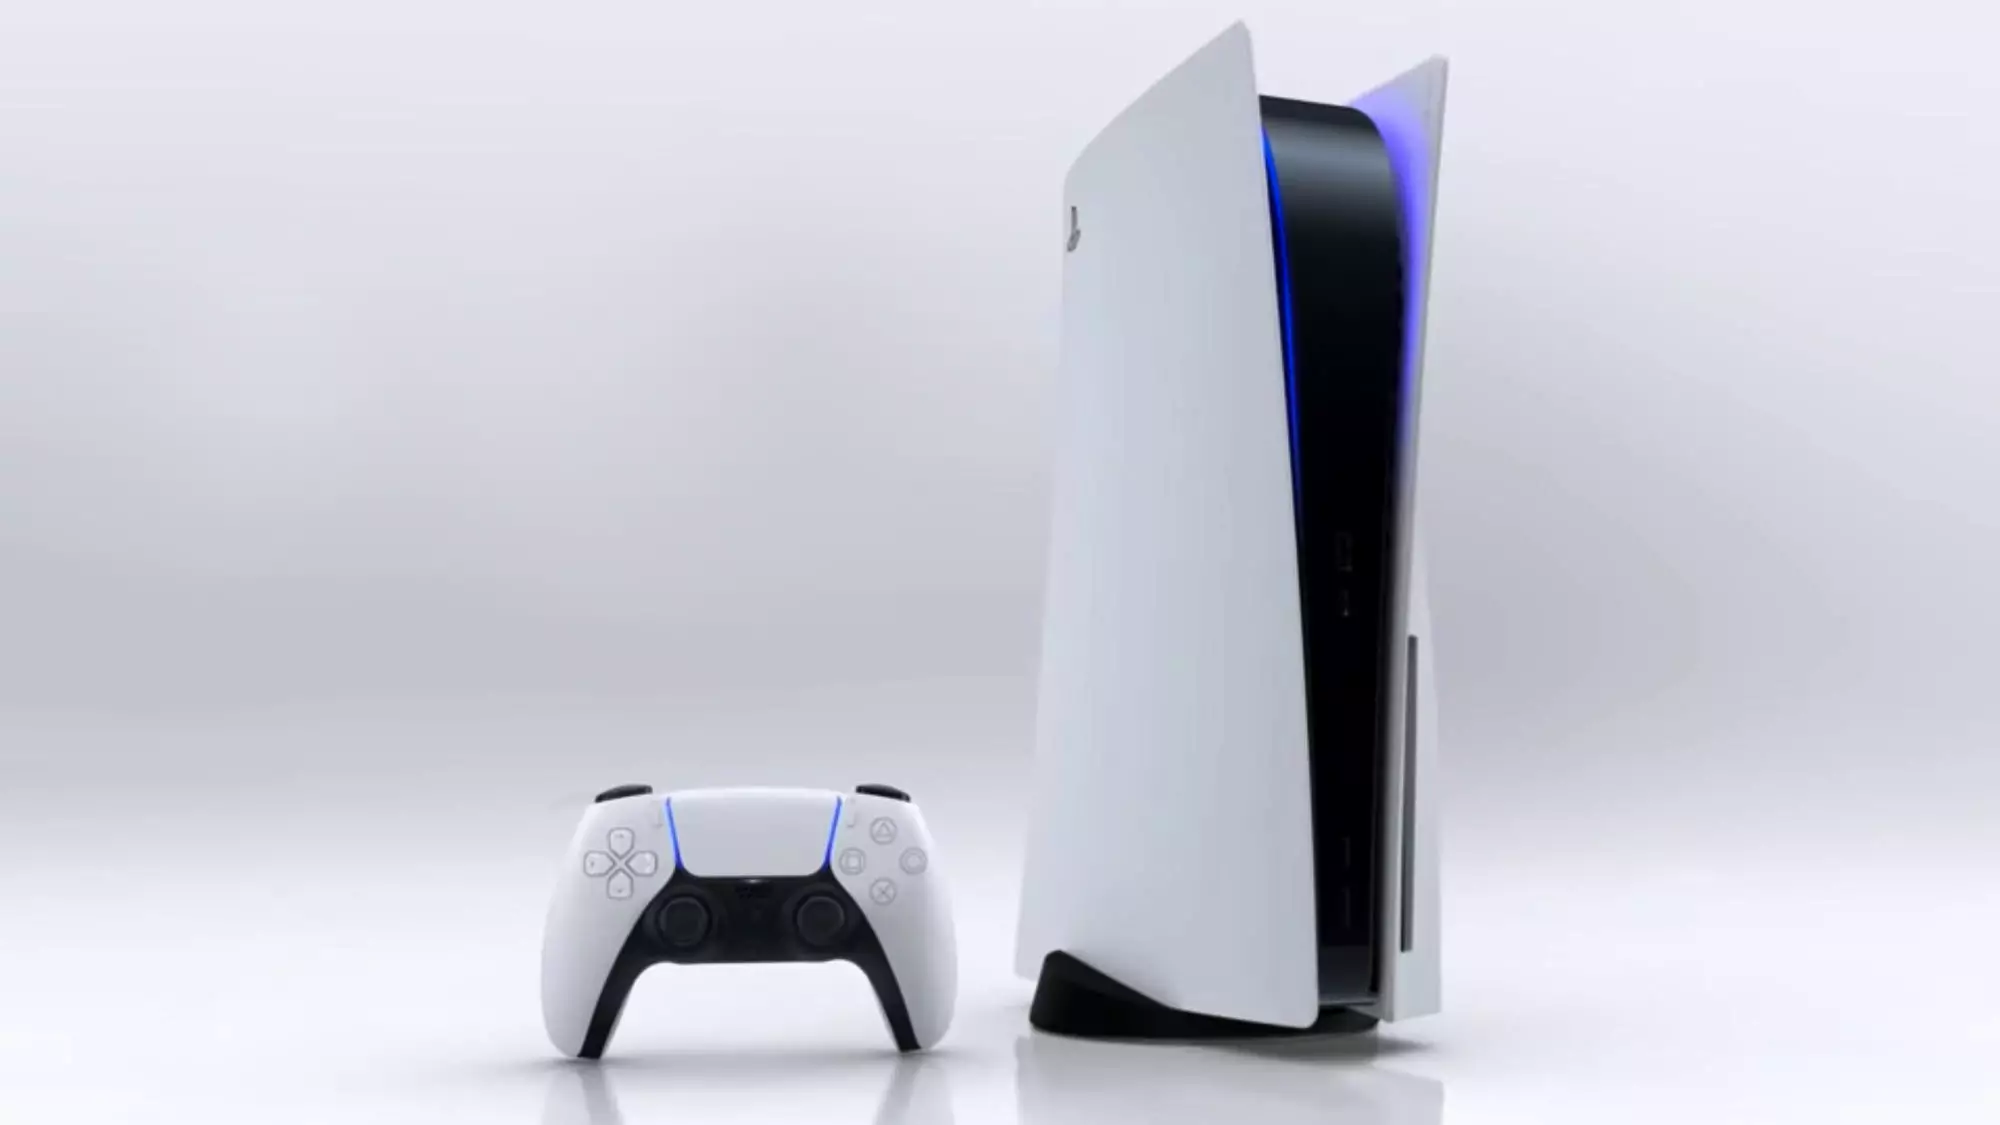 The PlayStation 5 /